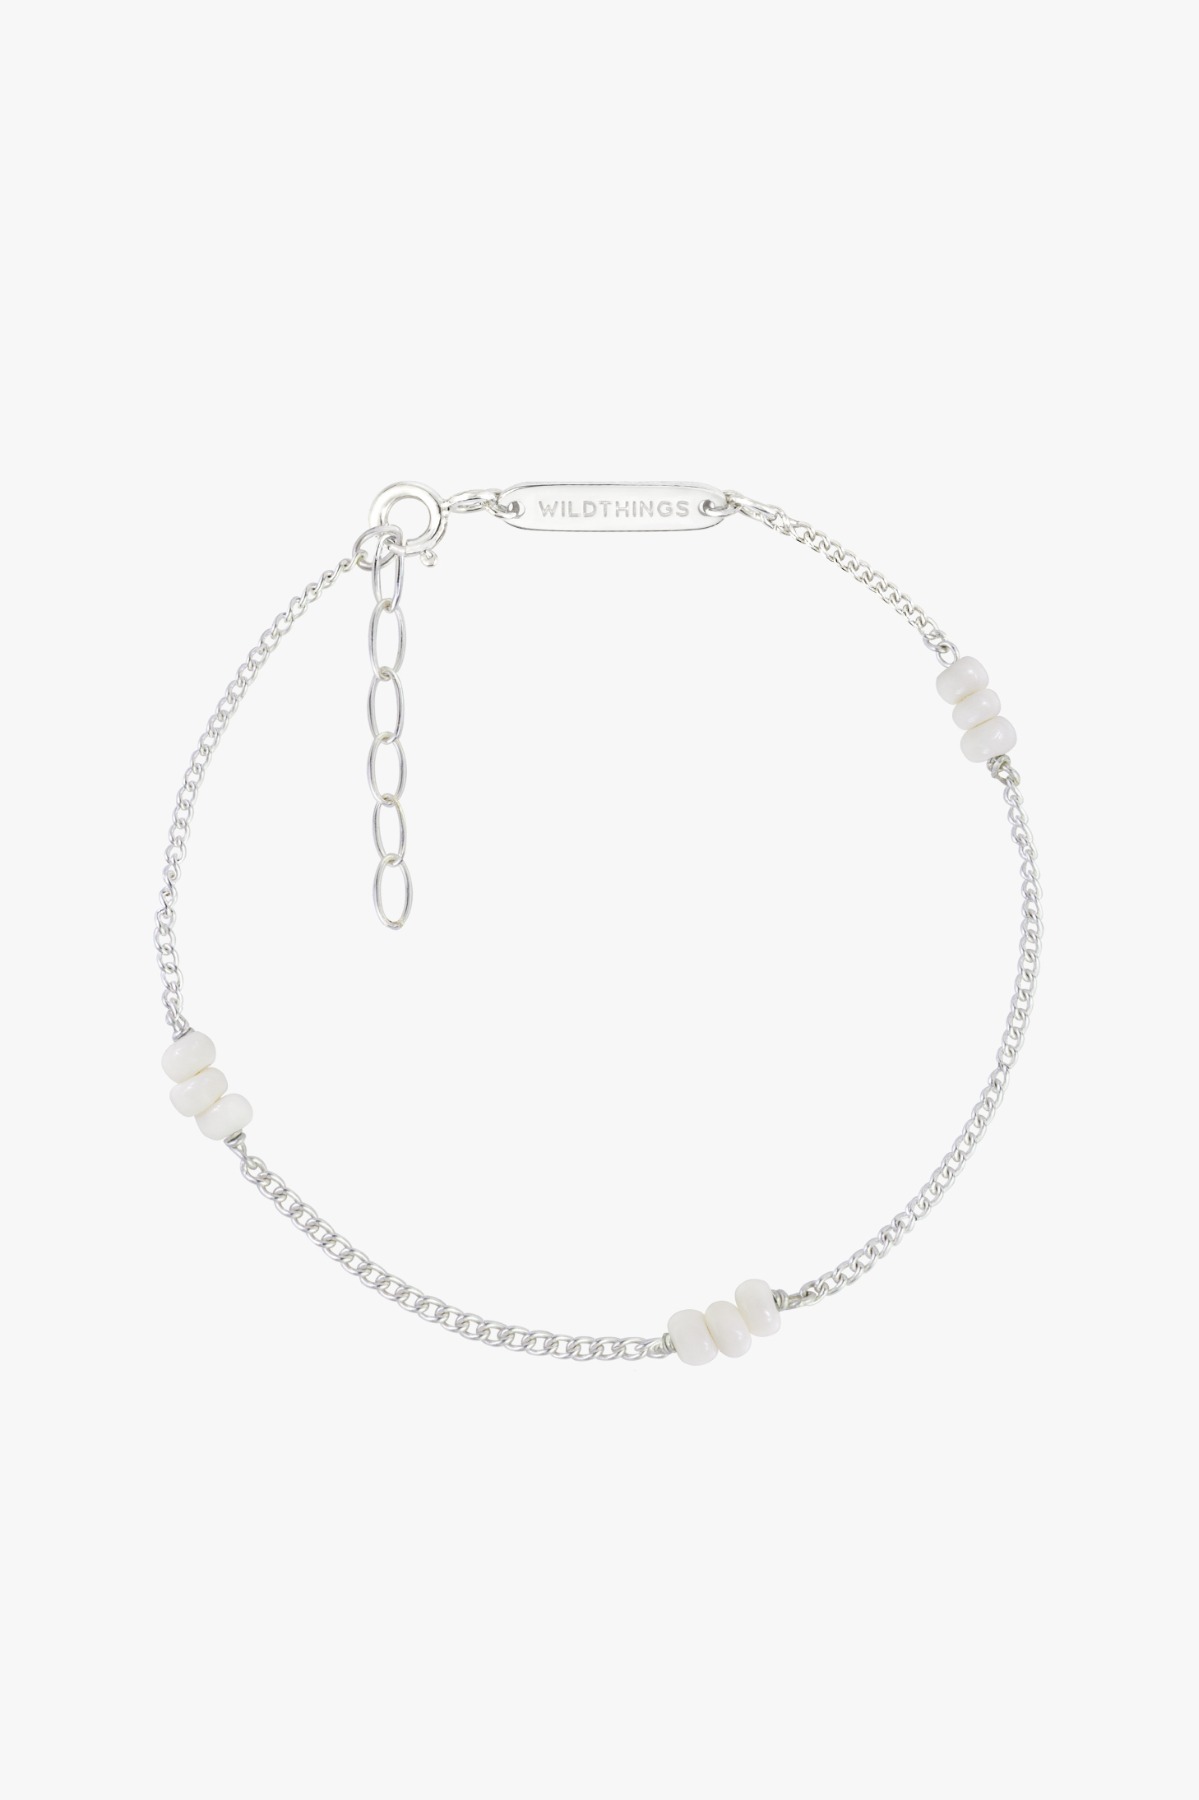 wildthings collectables - Triple white beads bracelet silver